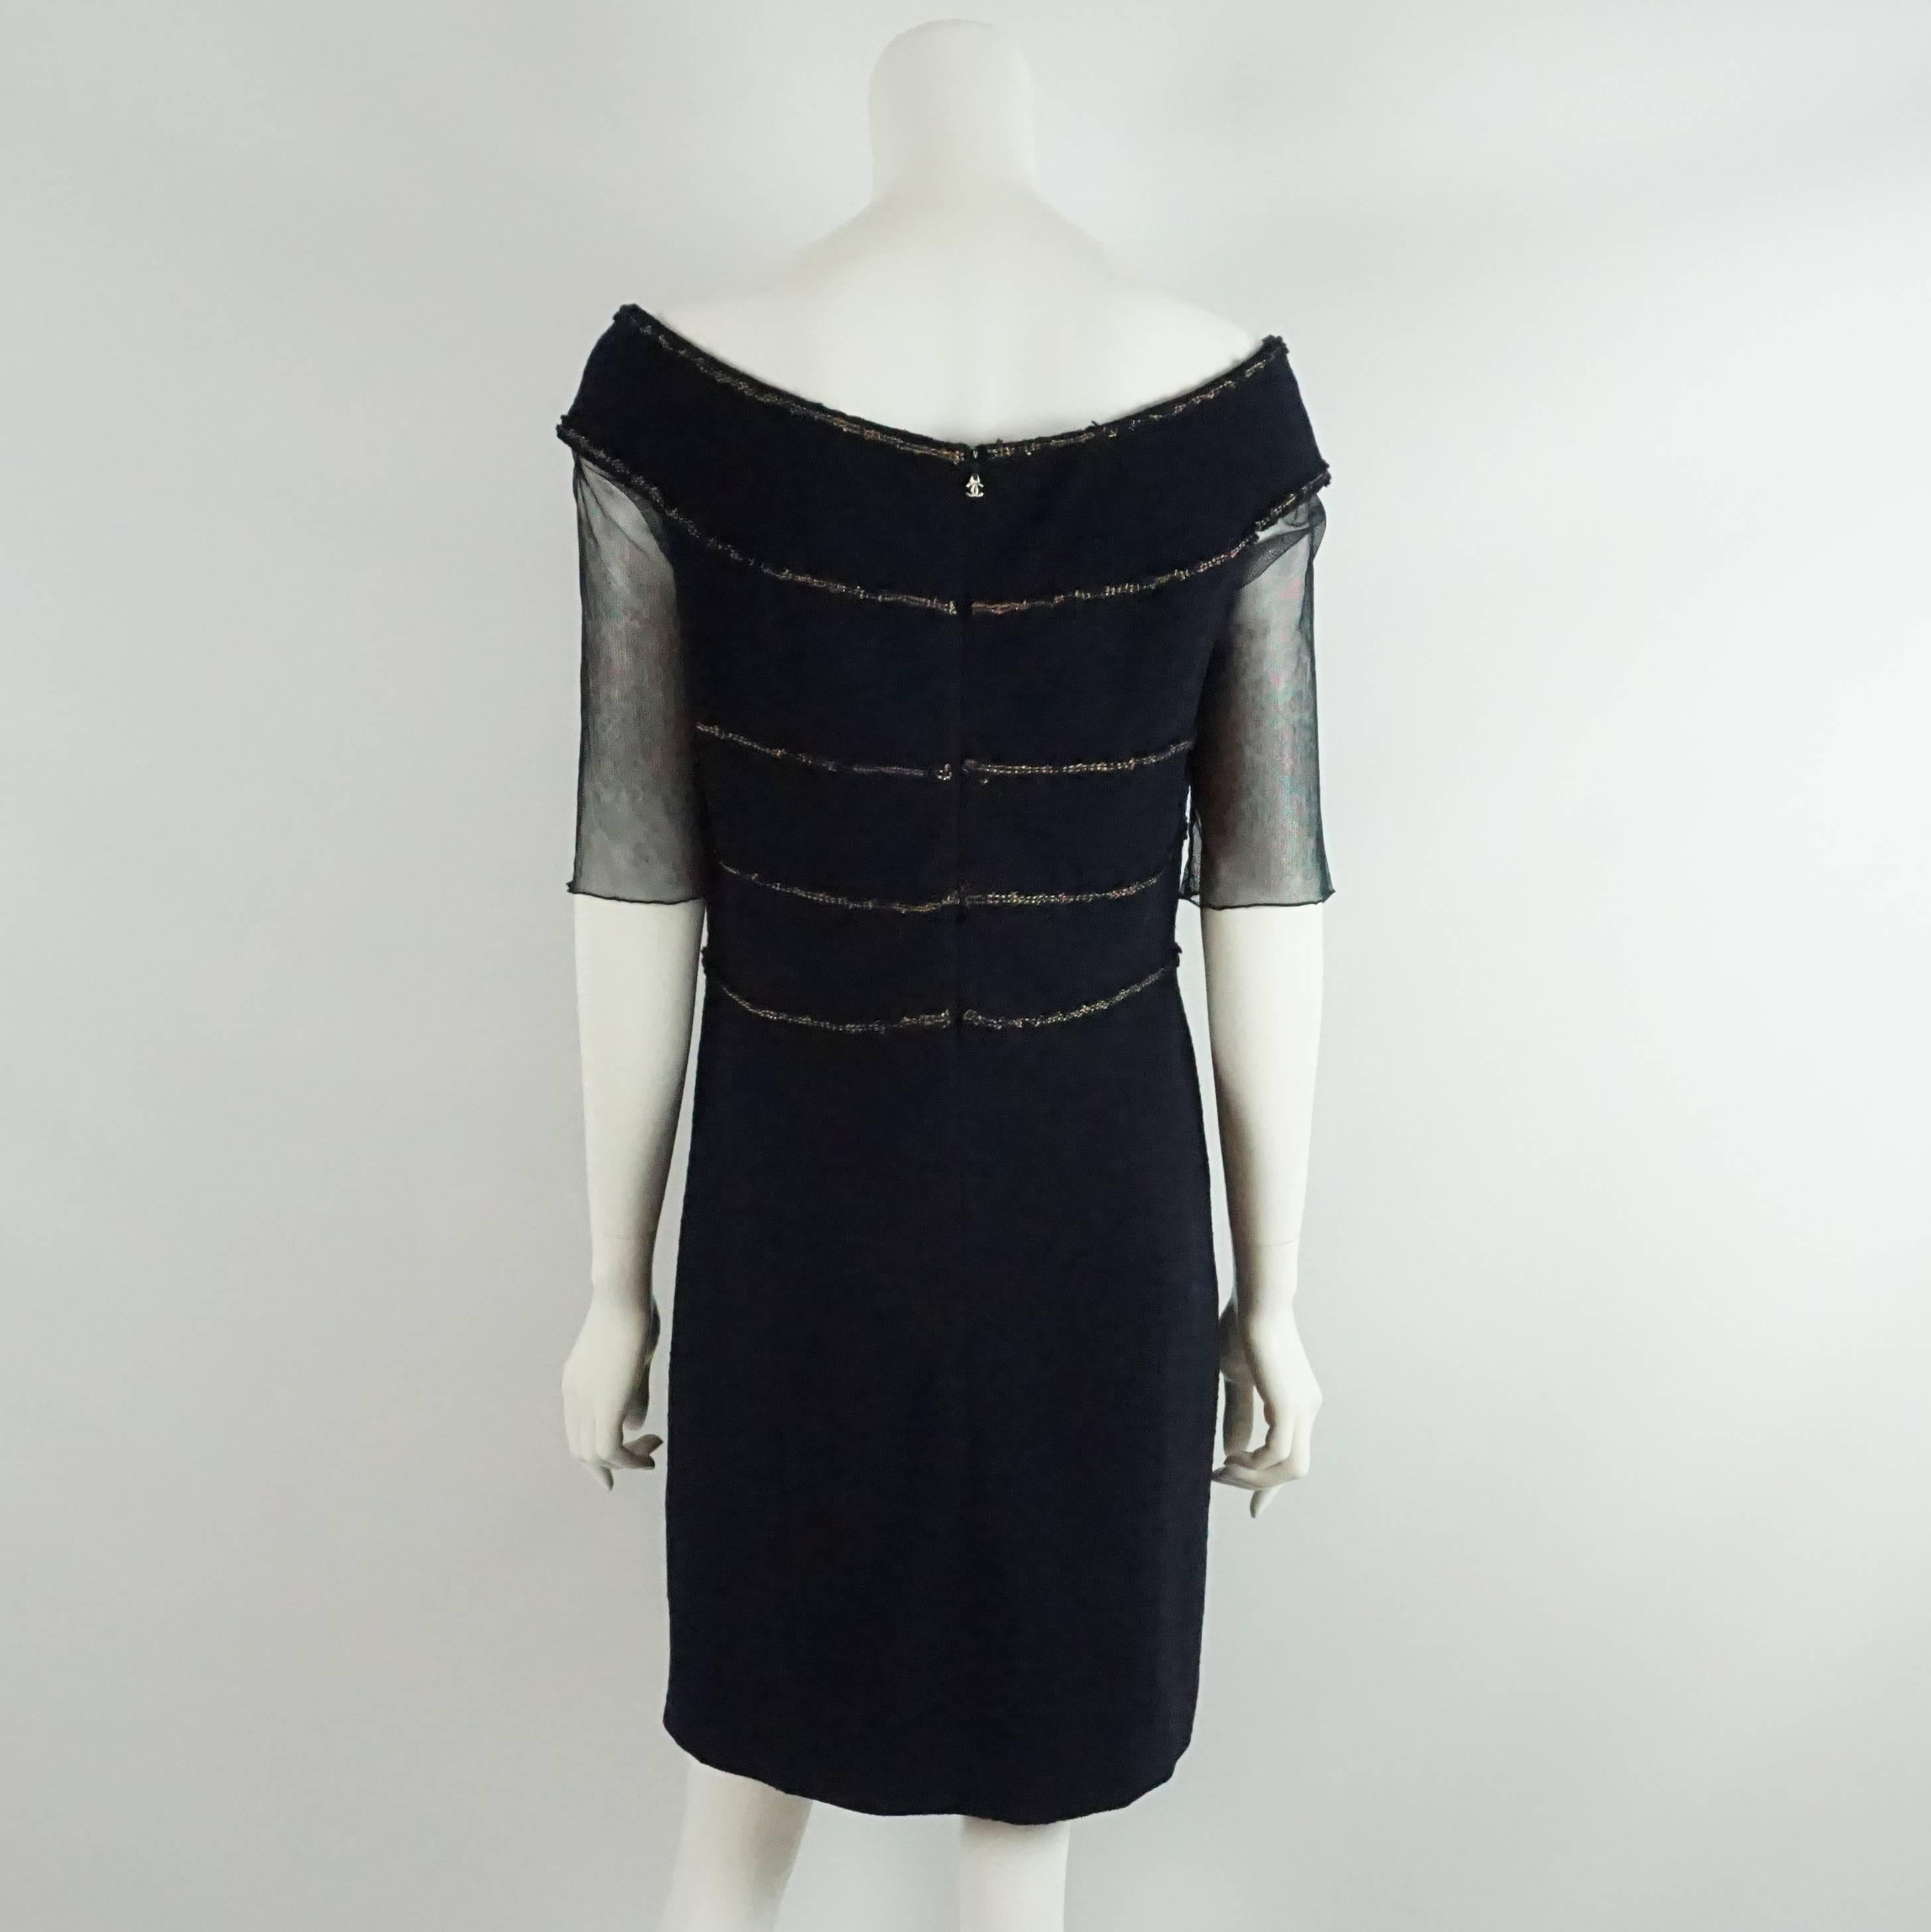 Black Chanel Navy Wool Dress with Mesh Sleeves - 42